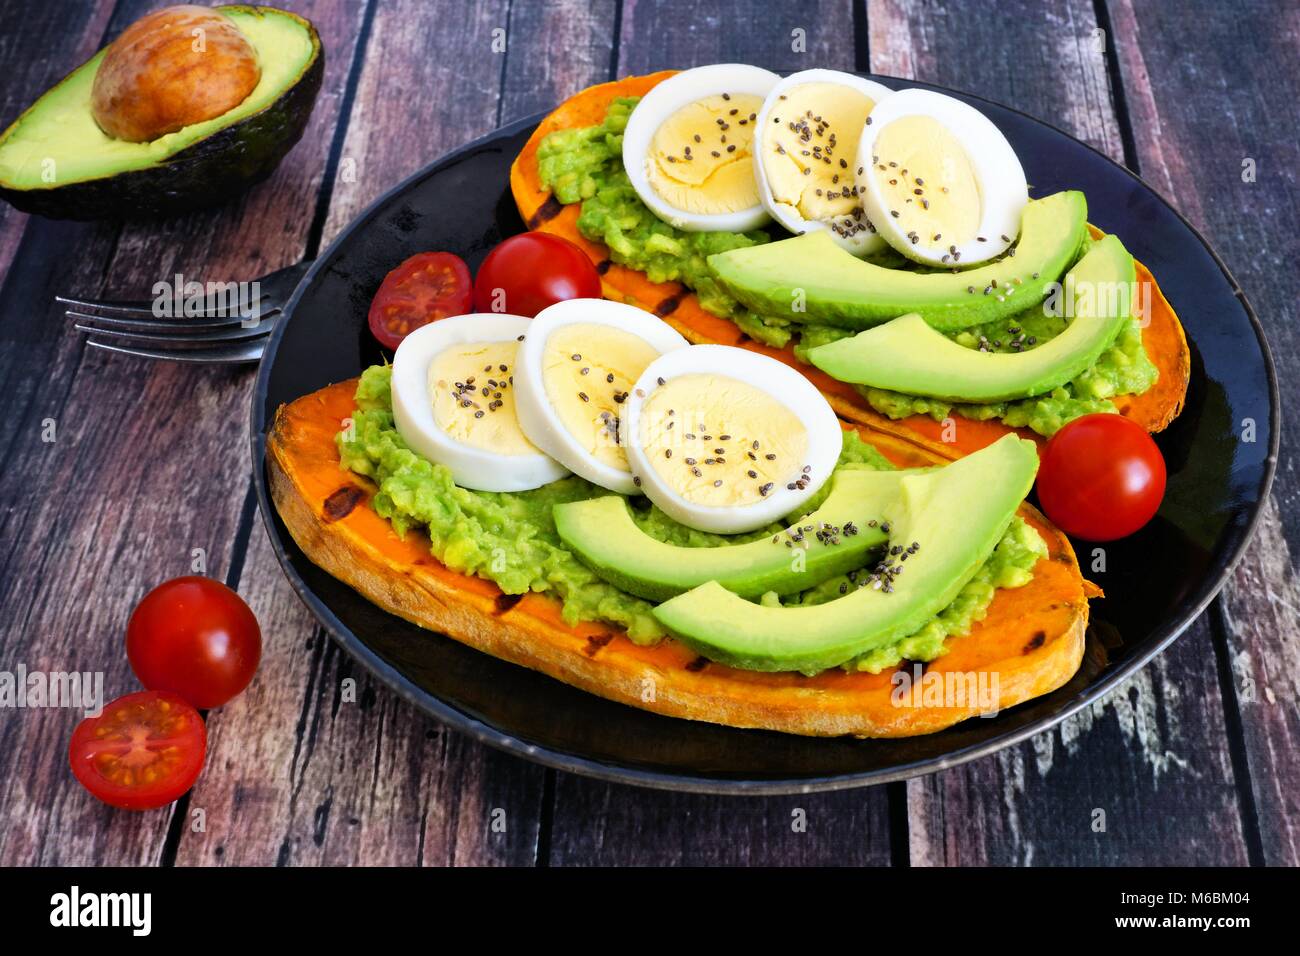 Sweet potato toasts with avocado, eggs and chia seeds on a dark plate. Table scene with a wooden background. Stock Photo